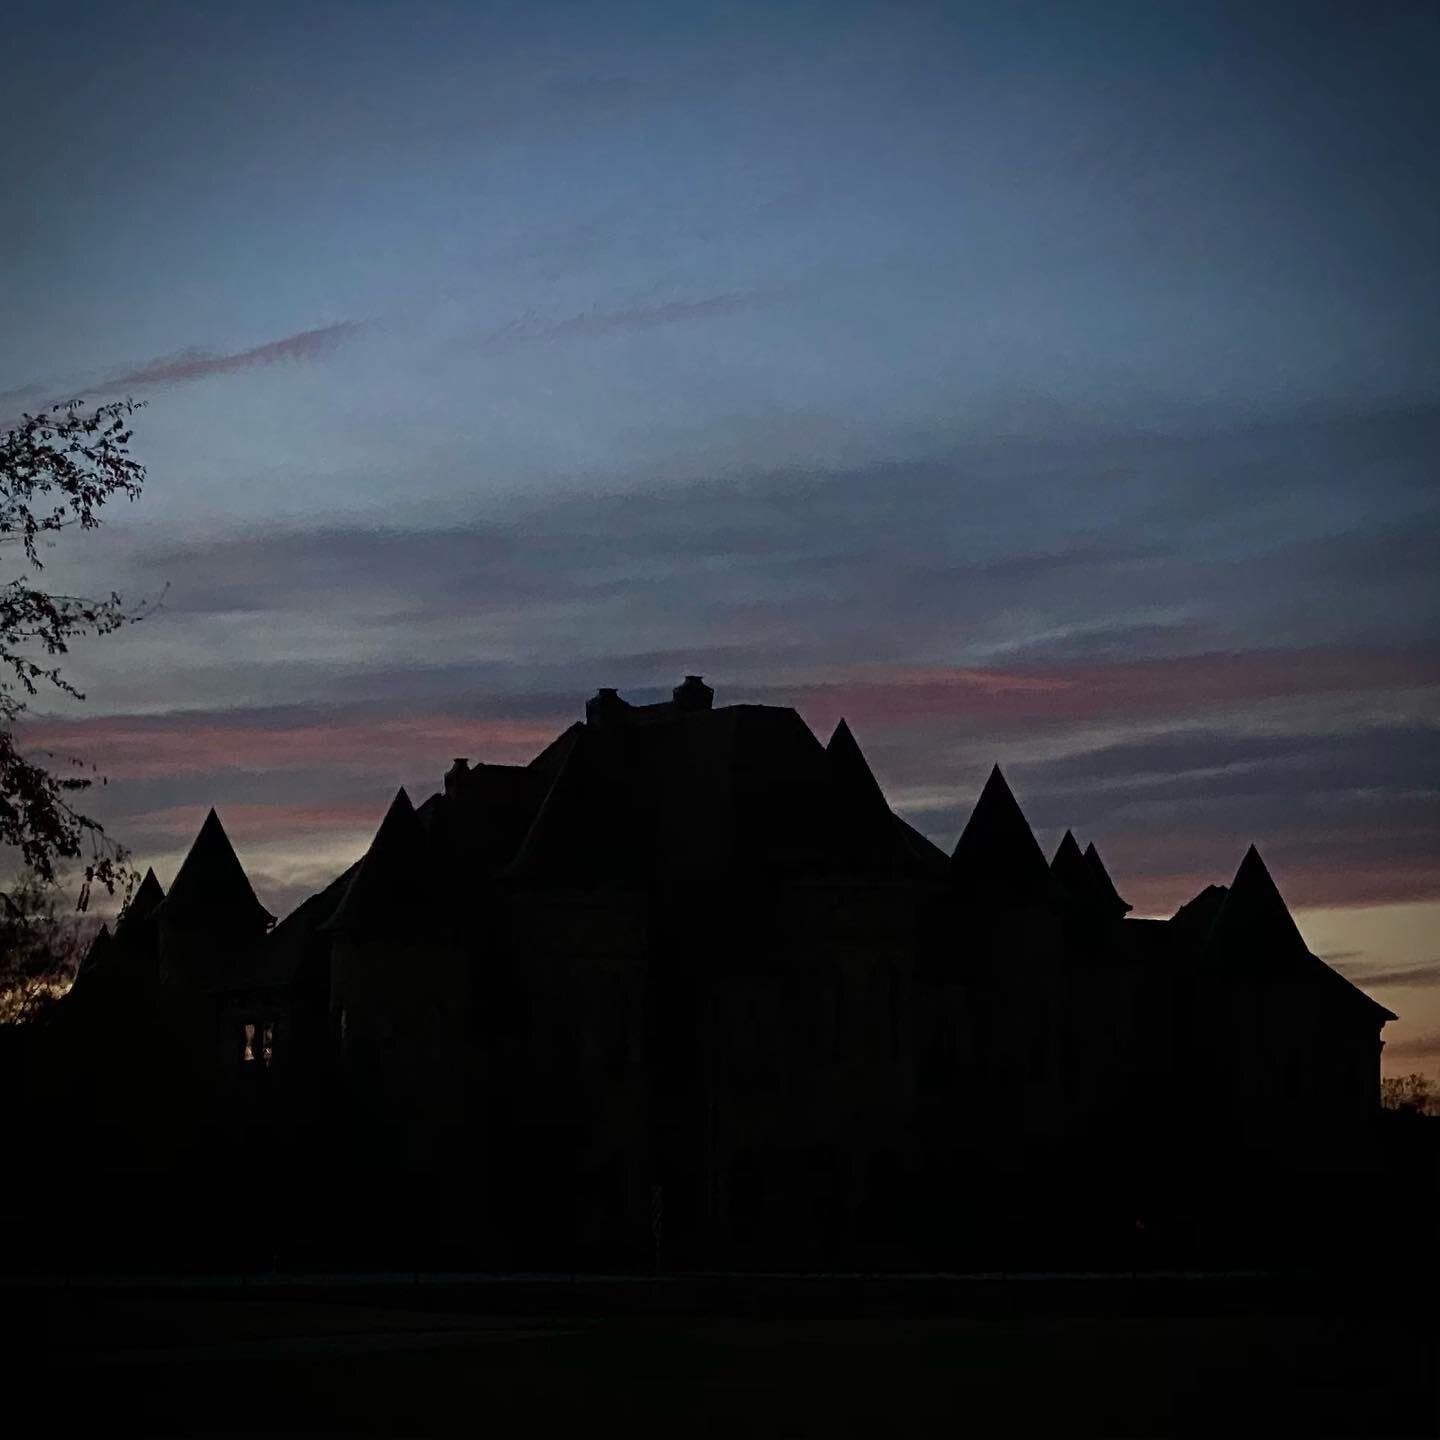 All Hallow&rsquo;s Eve. 
#spooky #castle #foreclosure #auction #vacant #mansion